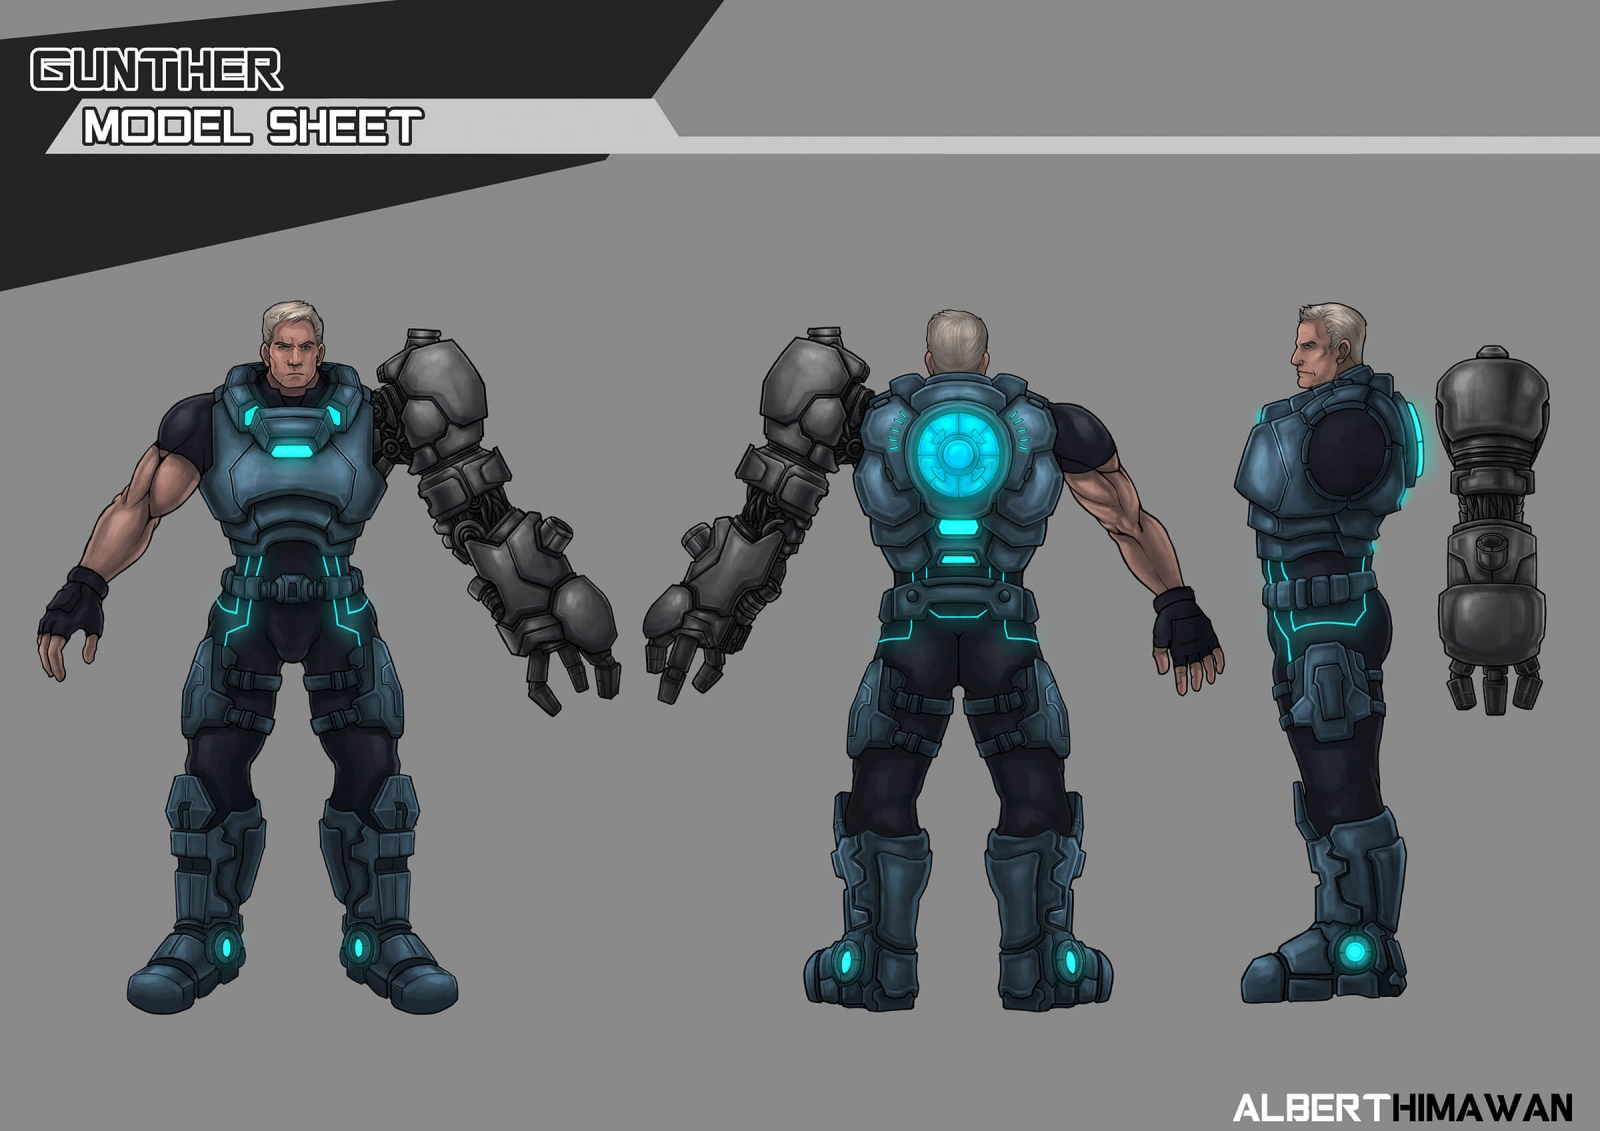 Turnaround character model sheet of a man in a futuristic, blue-metal suit with a bulky robotic left arm attachment.